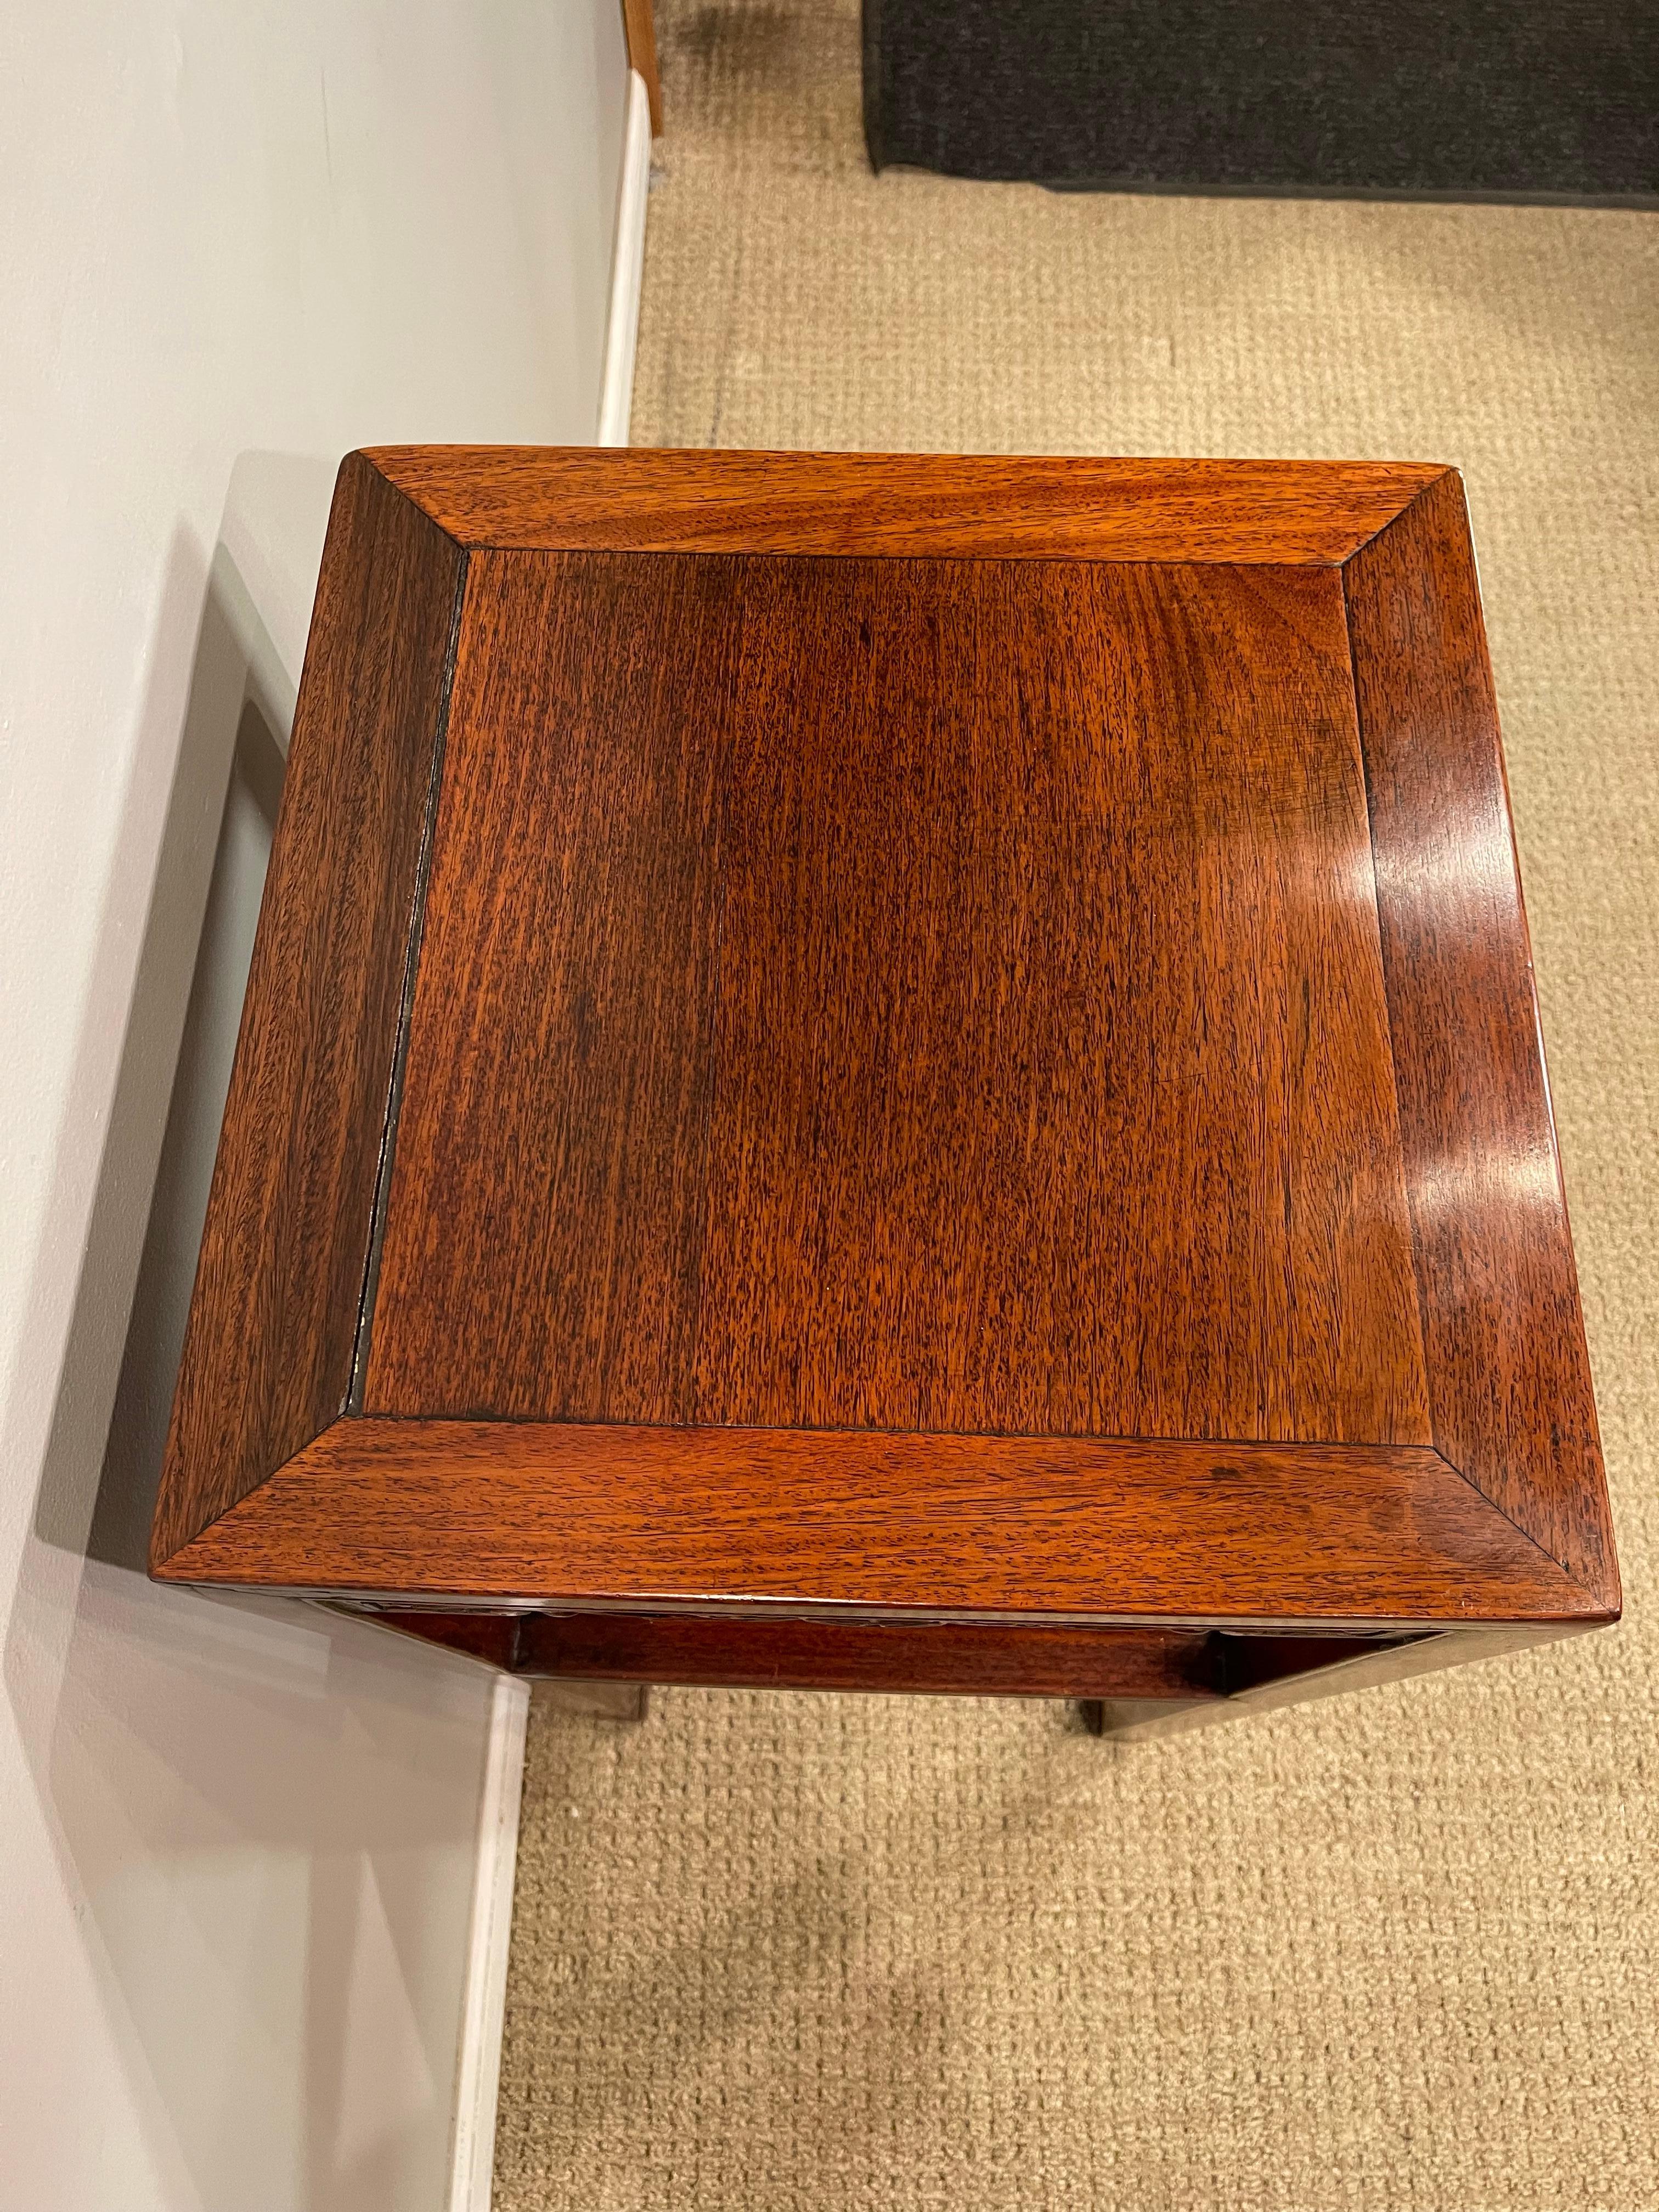 Chinese Hardwood 'Hungmu' Tea Table, Late 19th Century / Early 20th Century For Sale 9